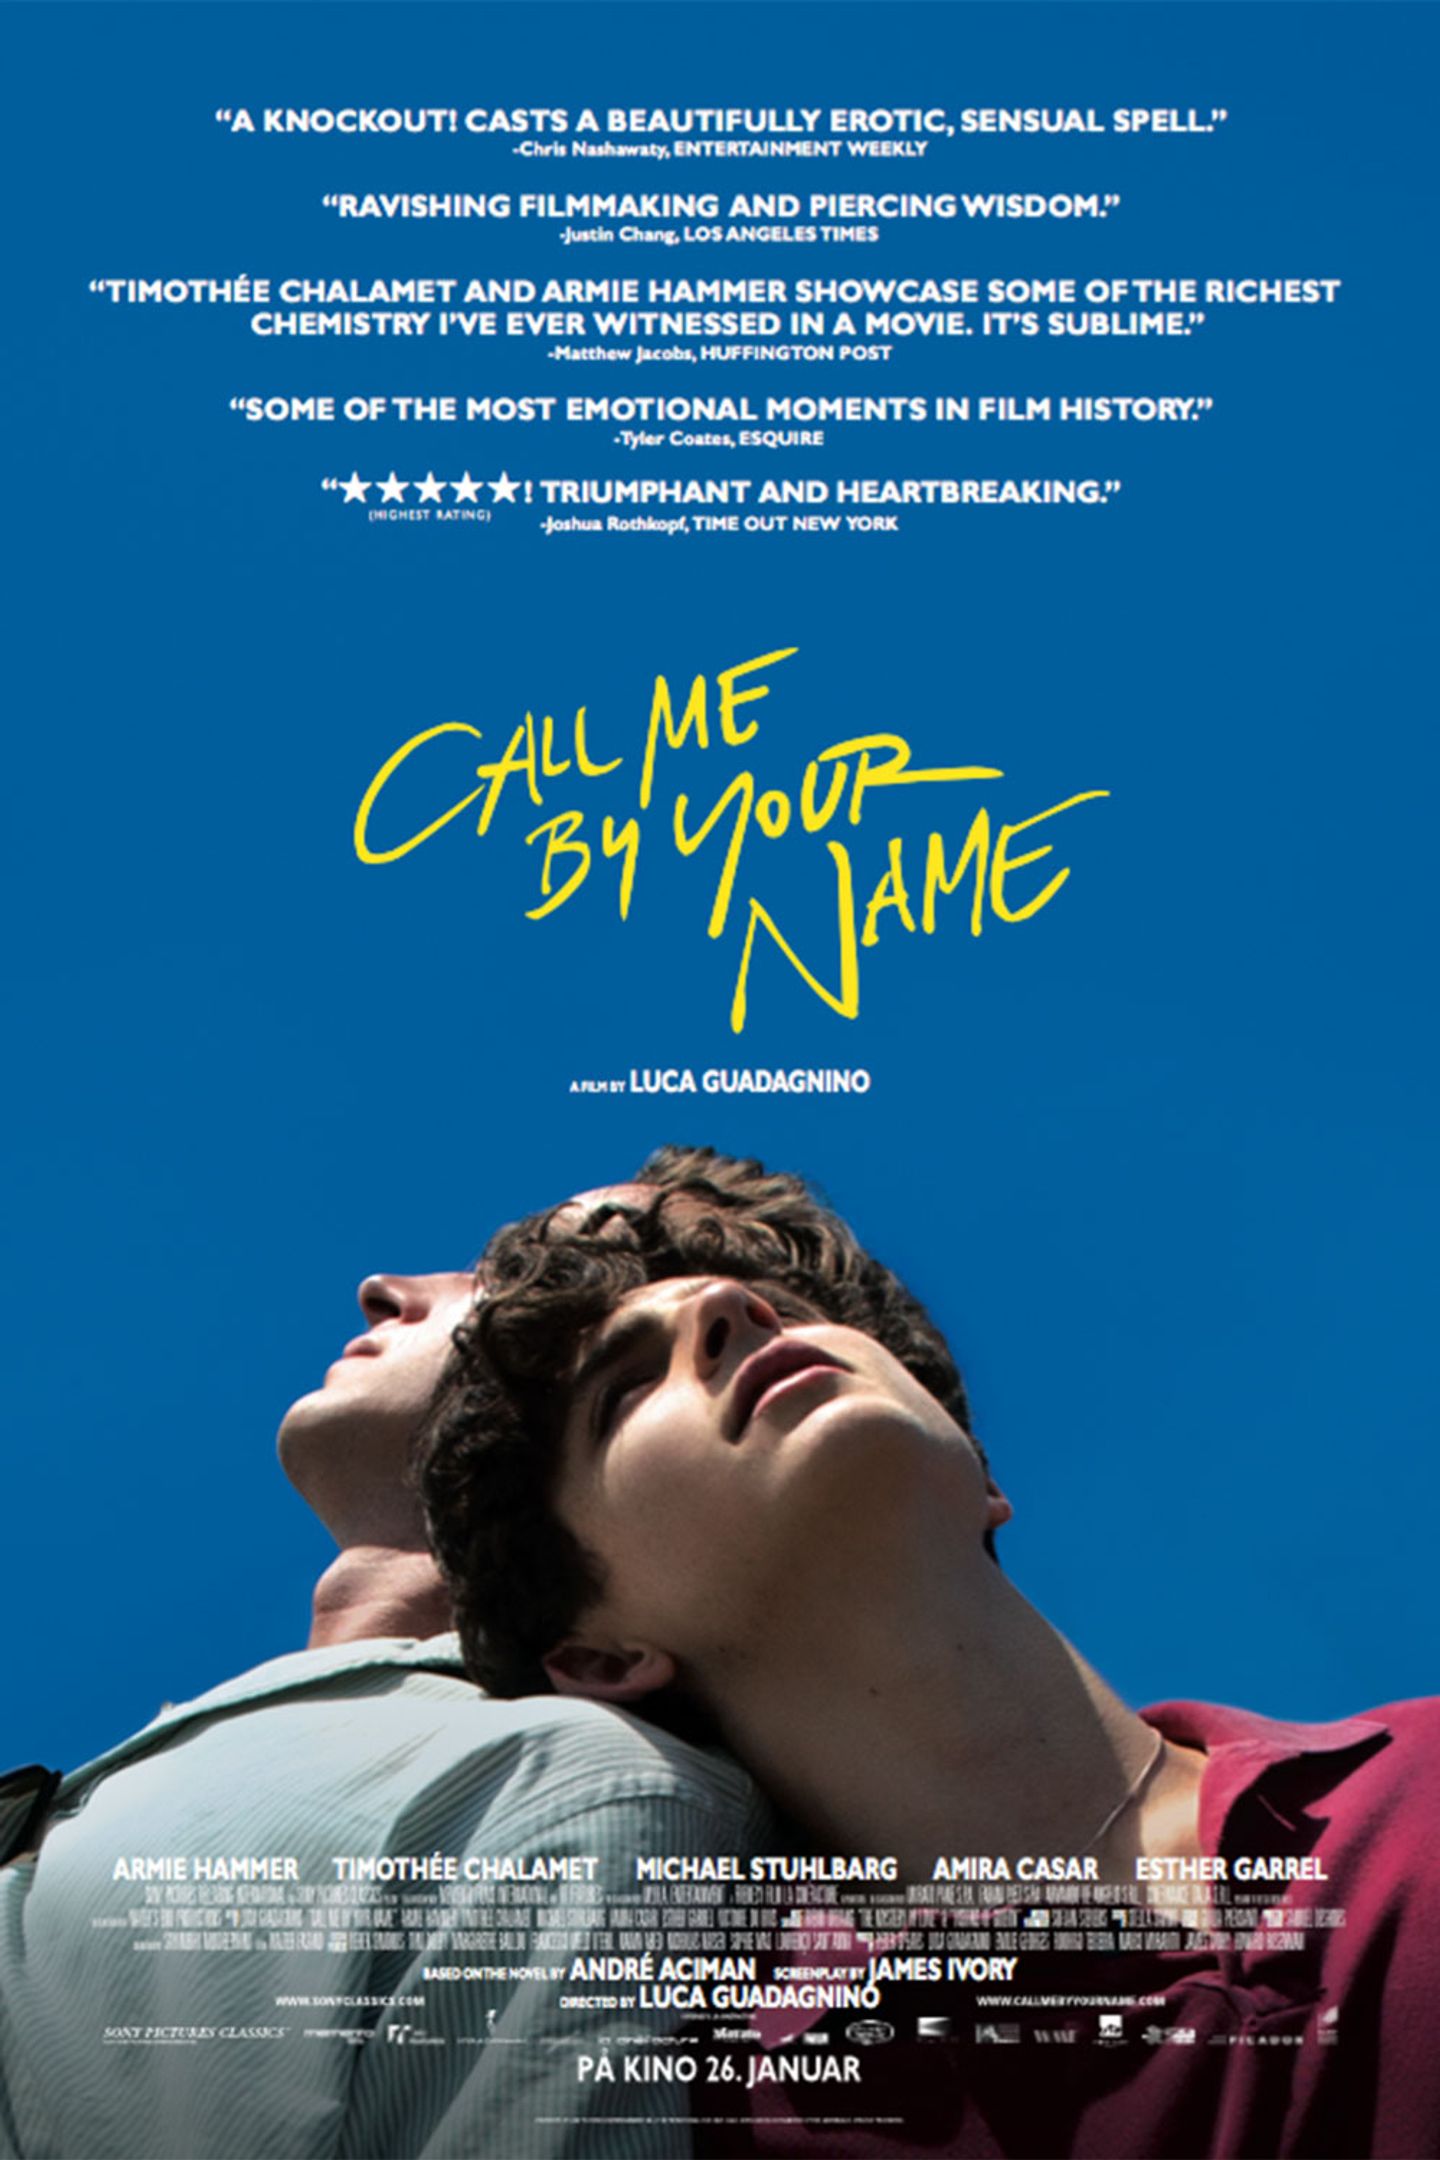 Plakat for 'Call Me by Your Name'